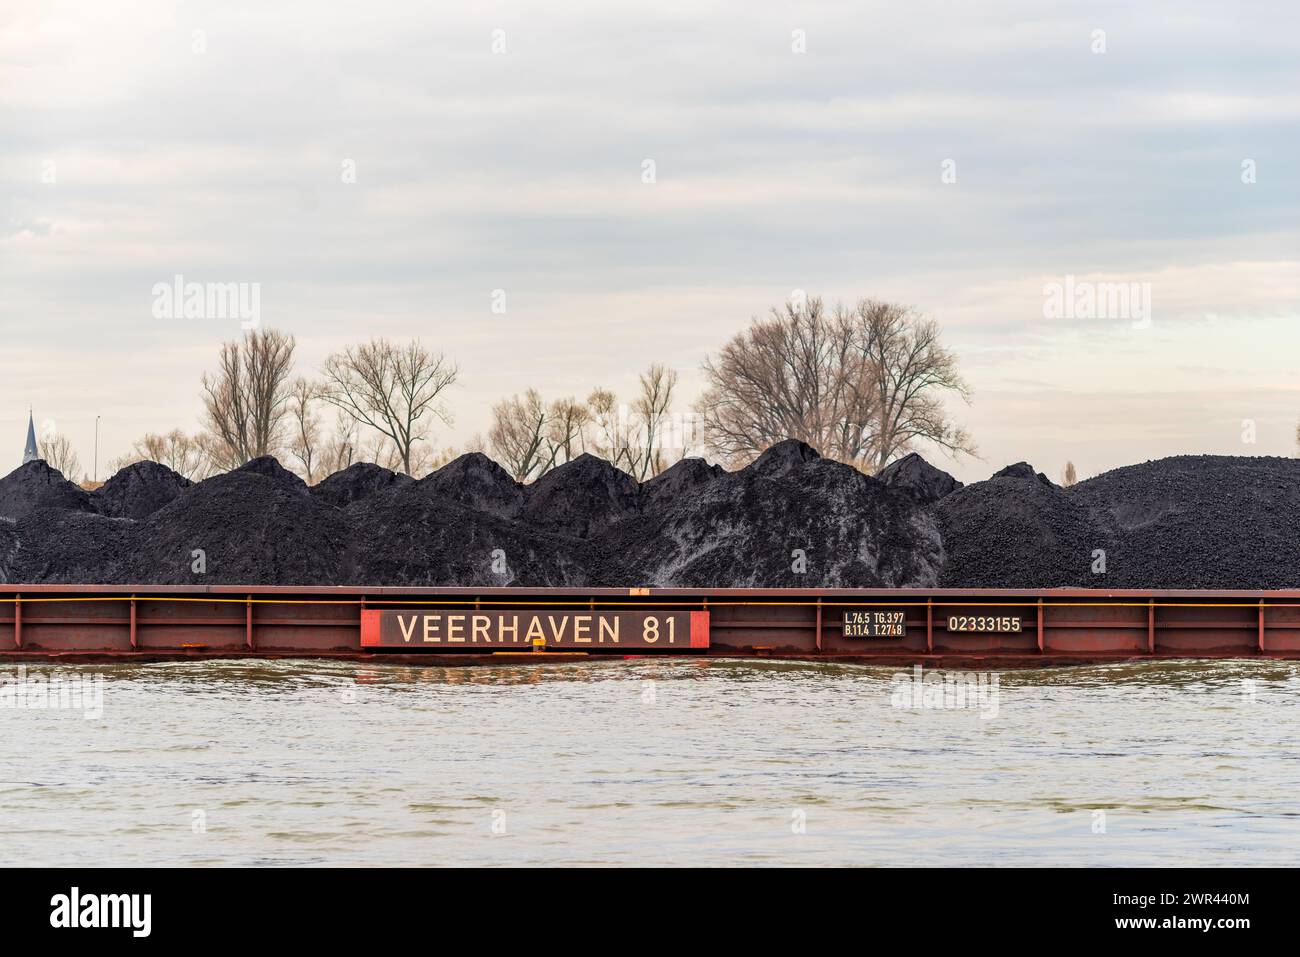 NIJMEGEN, NETHERLANDS - MARCH 9, 2024: Enormous dutch barge navigating the Waal river with a load of black sand Stock Photo